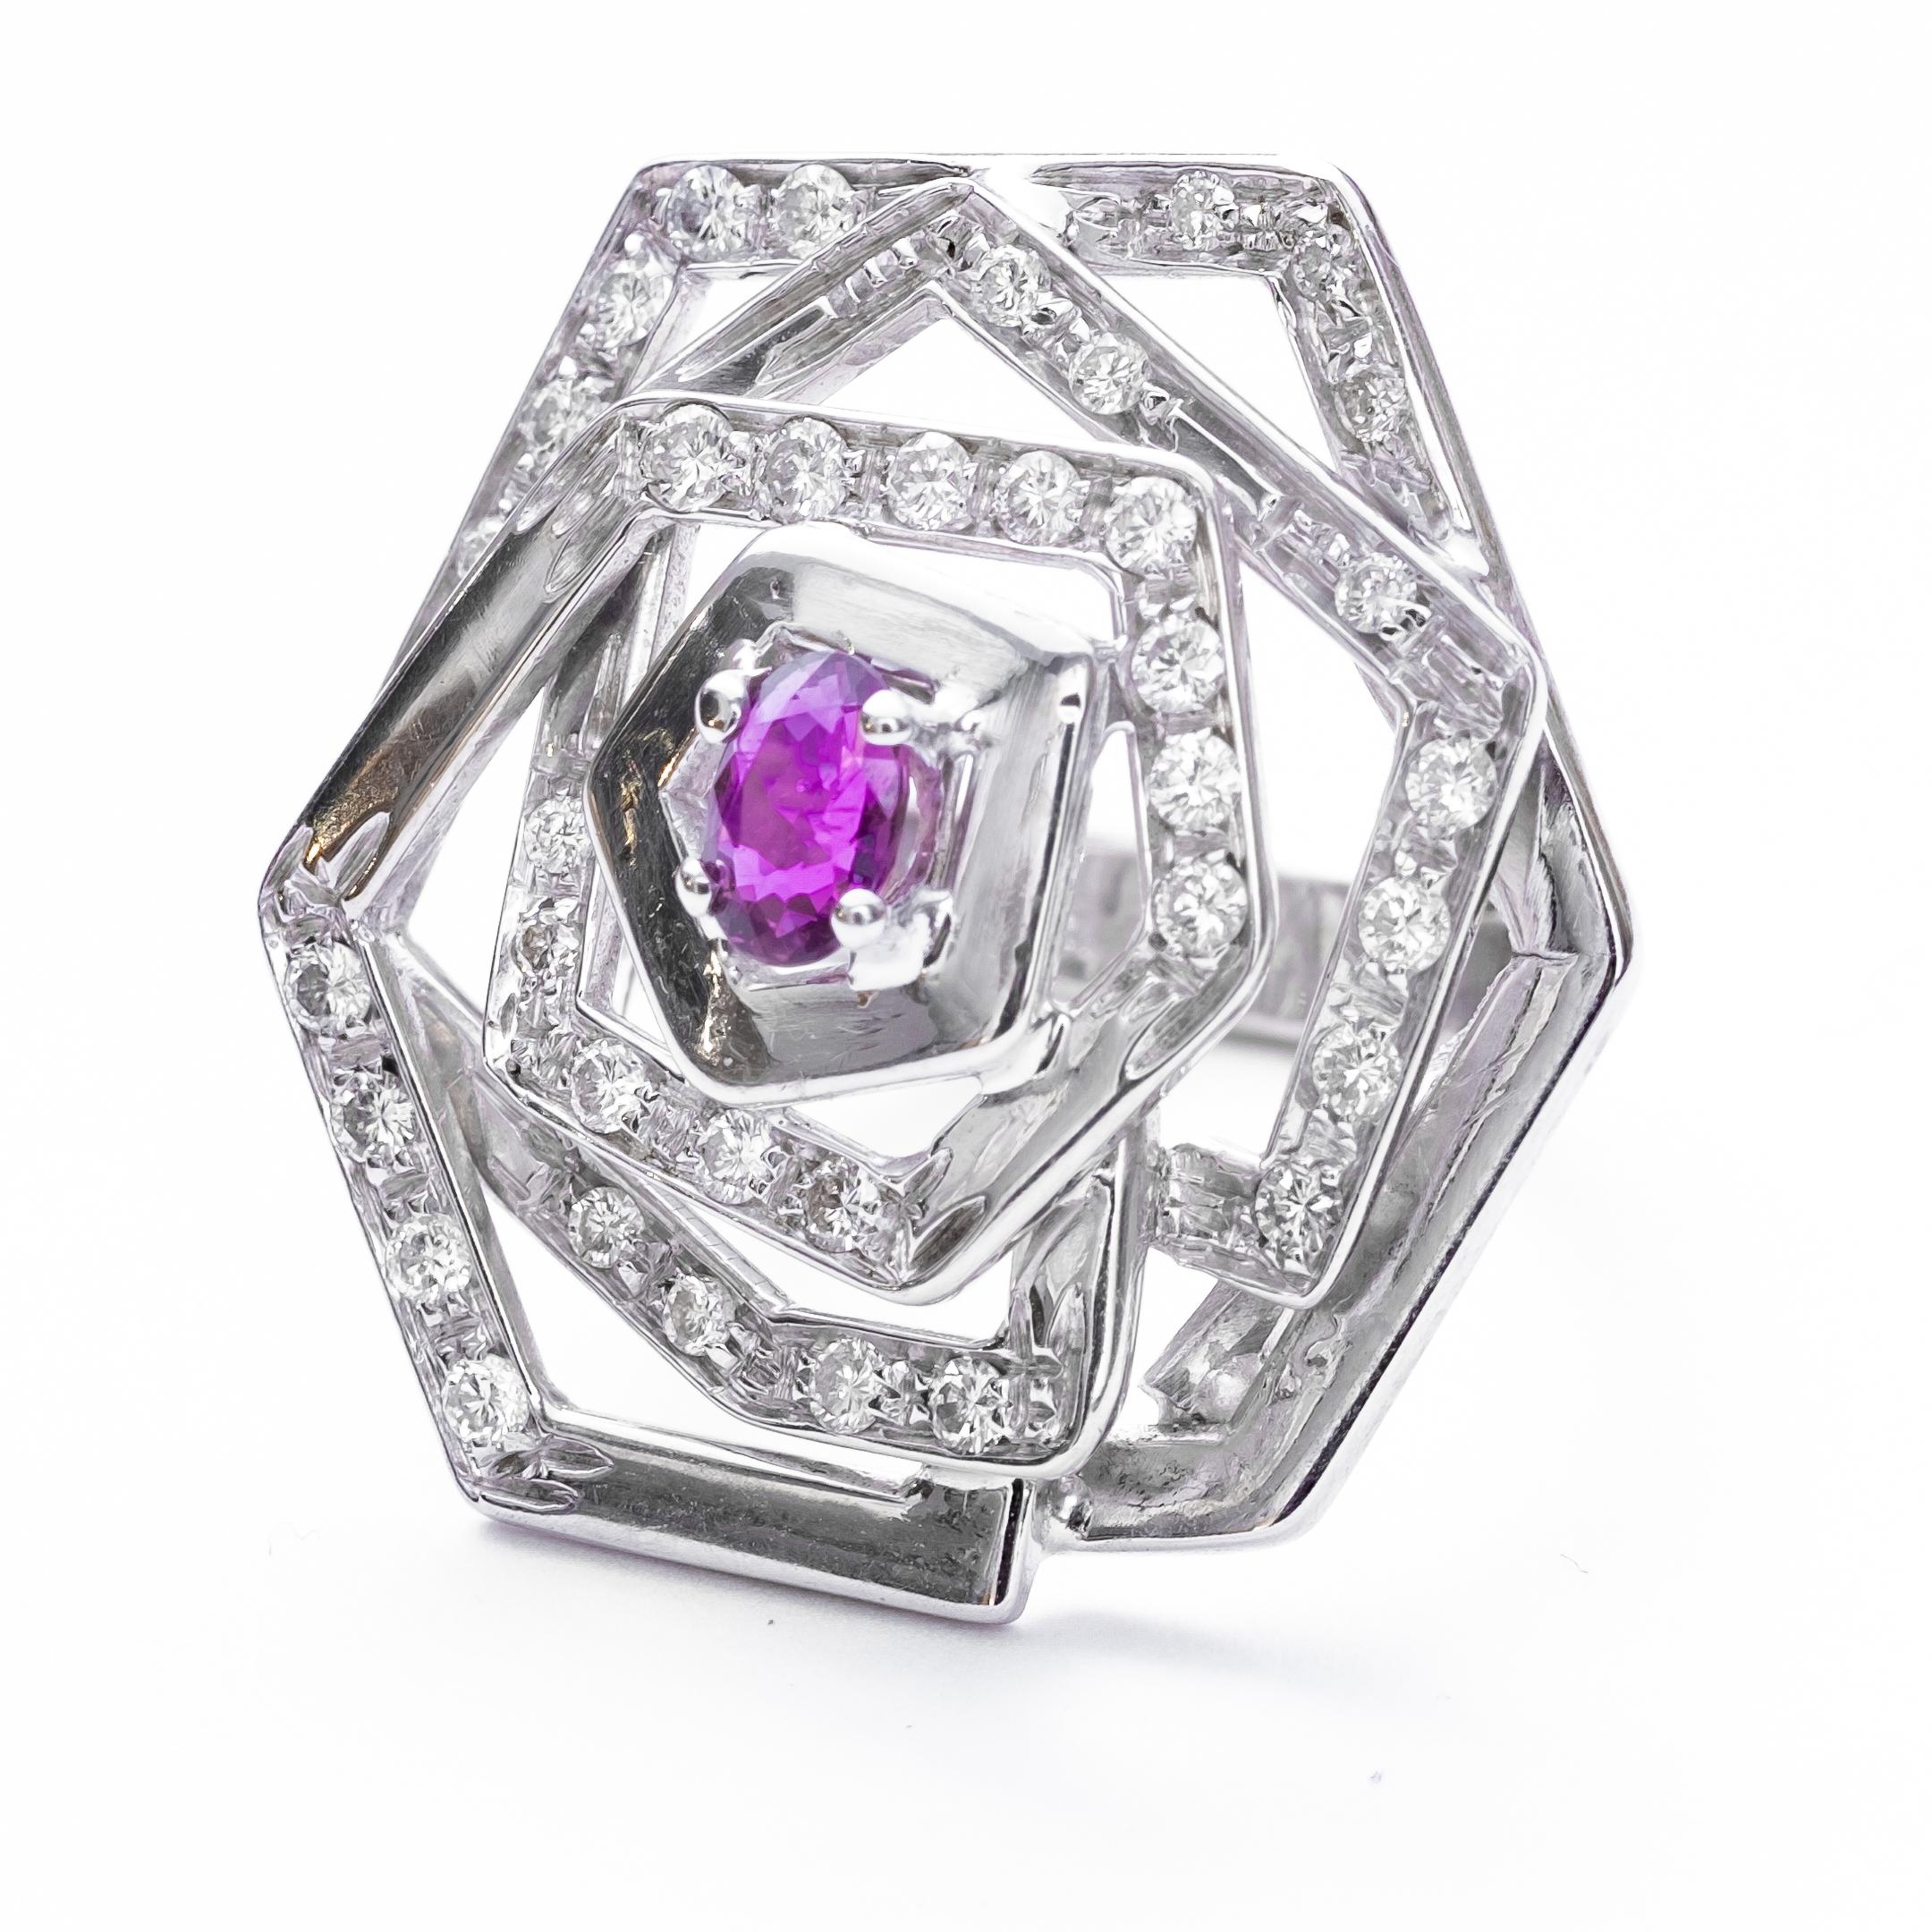 Italian 18K white gold geometric motif fashion ring designed with one oval faceted purple sapphire center set in a four prong white gold setting. This gemstone is positioned in the center of an open work, three layer, multi-side design. Sapphire